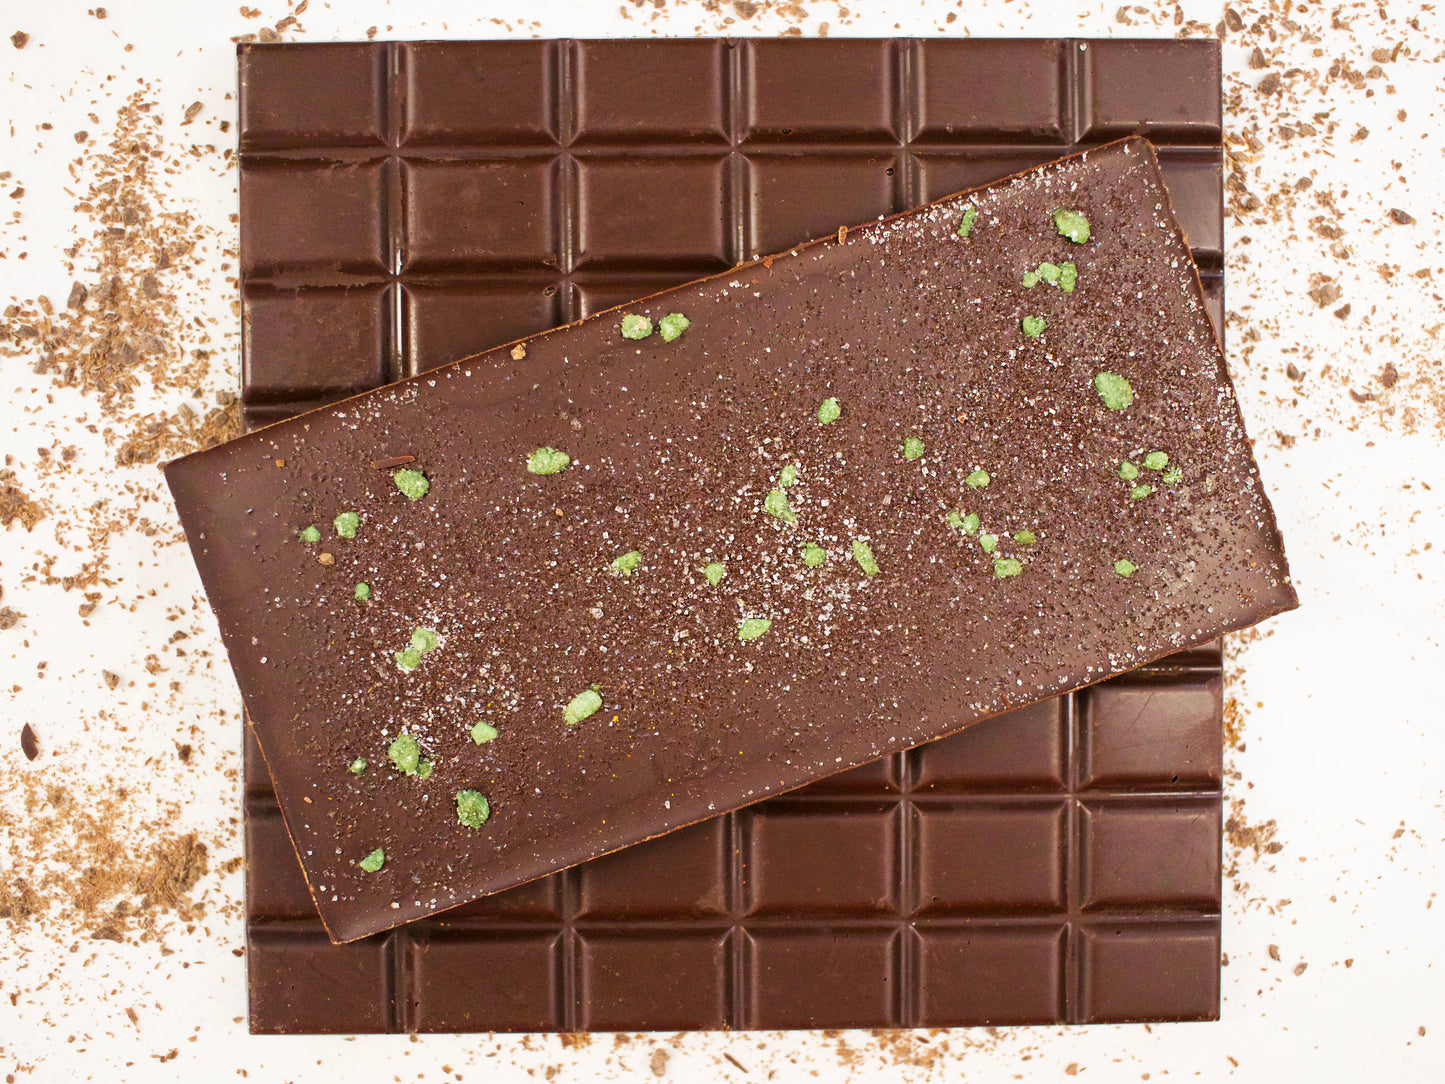 image shows 3, 100g hand made dark chocolate peppermint bars, two showing break up sections and one showing crystallised mint leaf decoration.